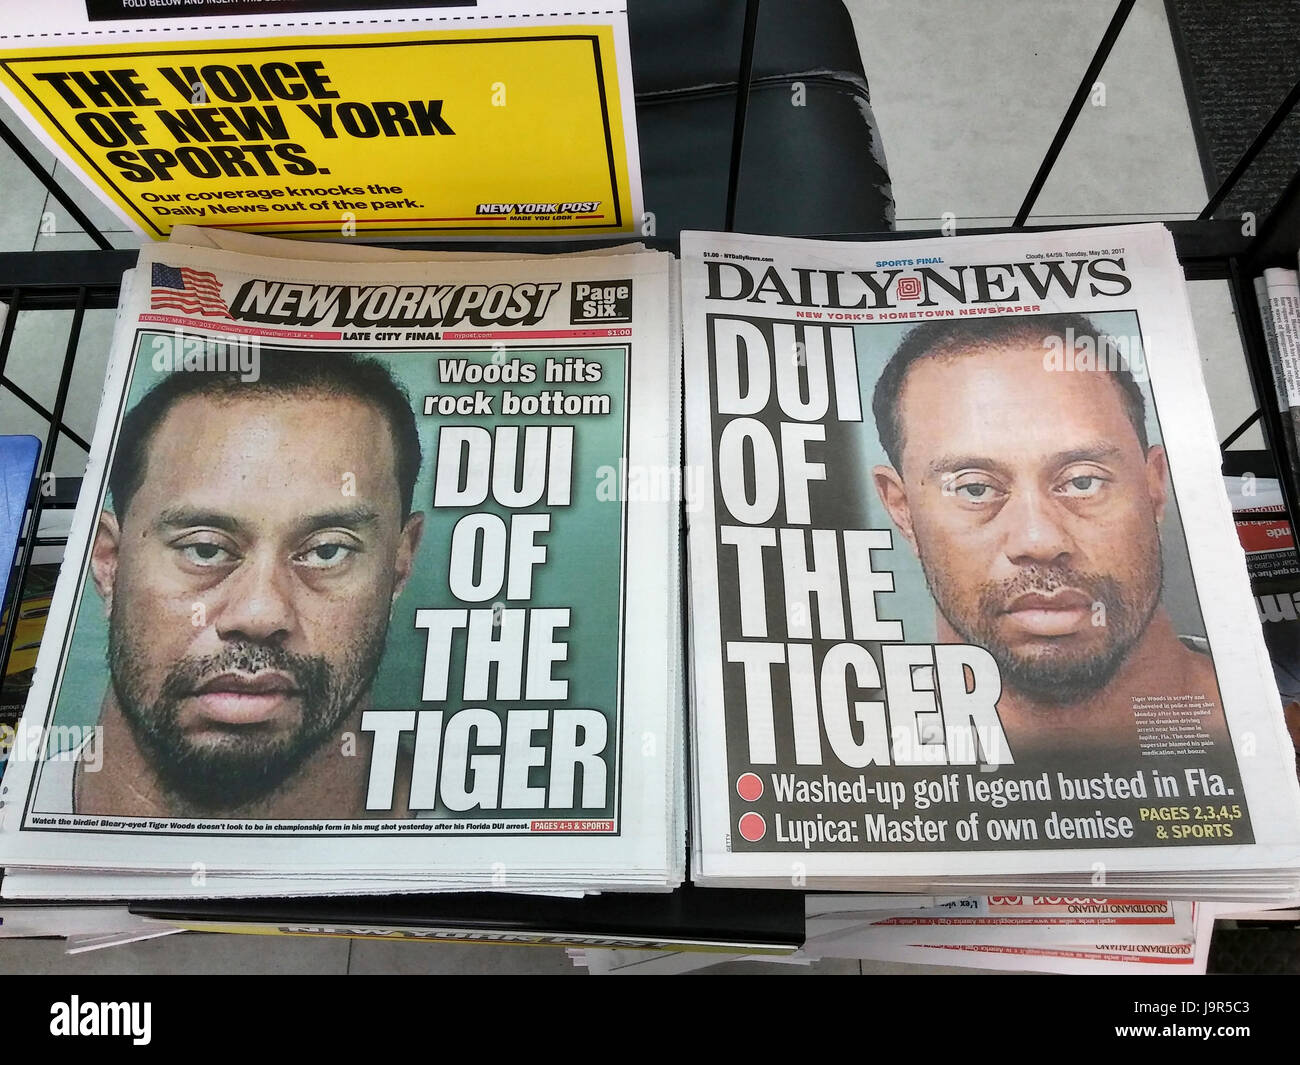 The New York Daily News and the New York Post on Tuesday, May 30, 2017 use identical headlines and the Palm Beach County Sheriff Department's official mugshot in their coverage of golfer Tiger Woods' arrest allegedly for DUI..  (© Richard B. Levine) Stock Photo